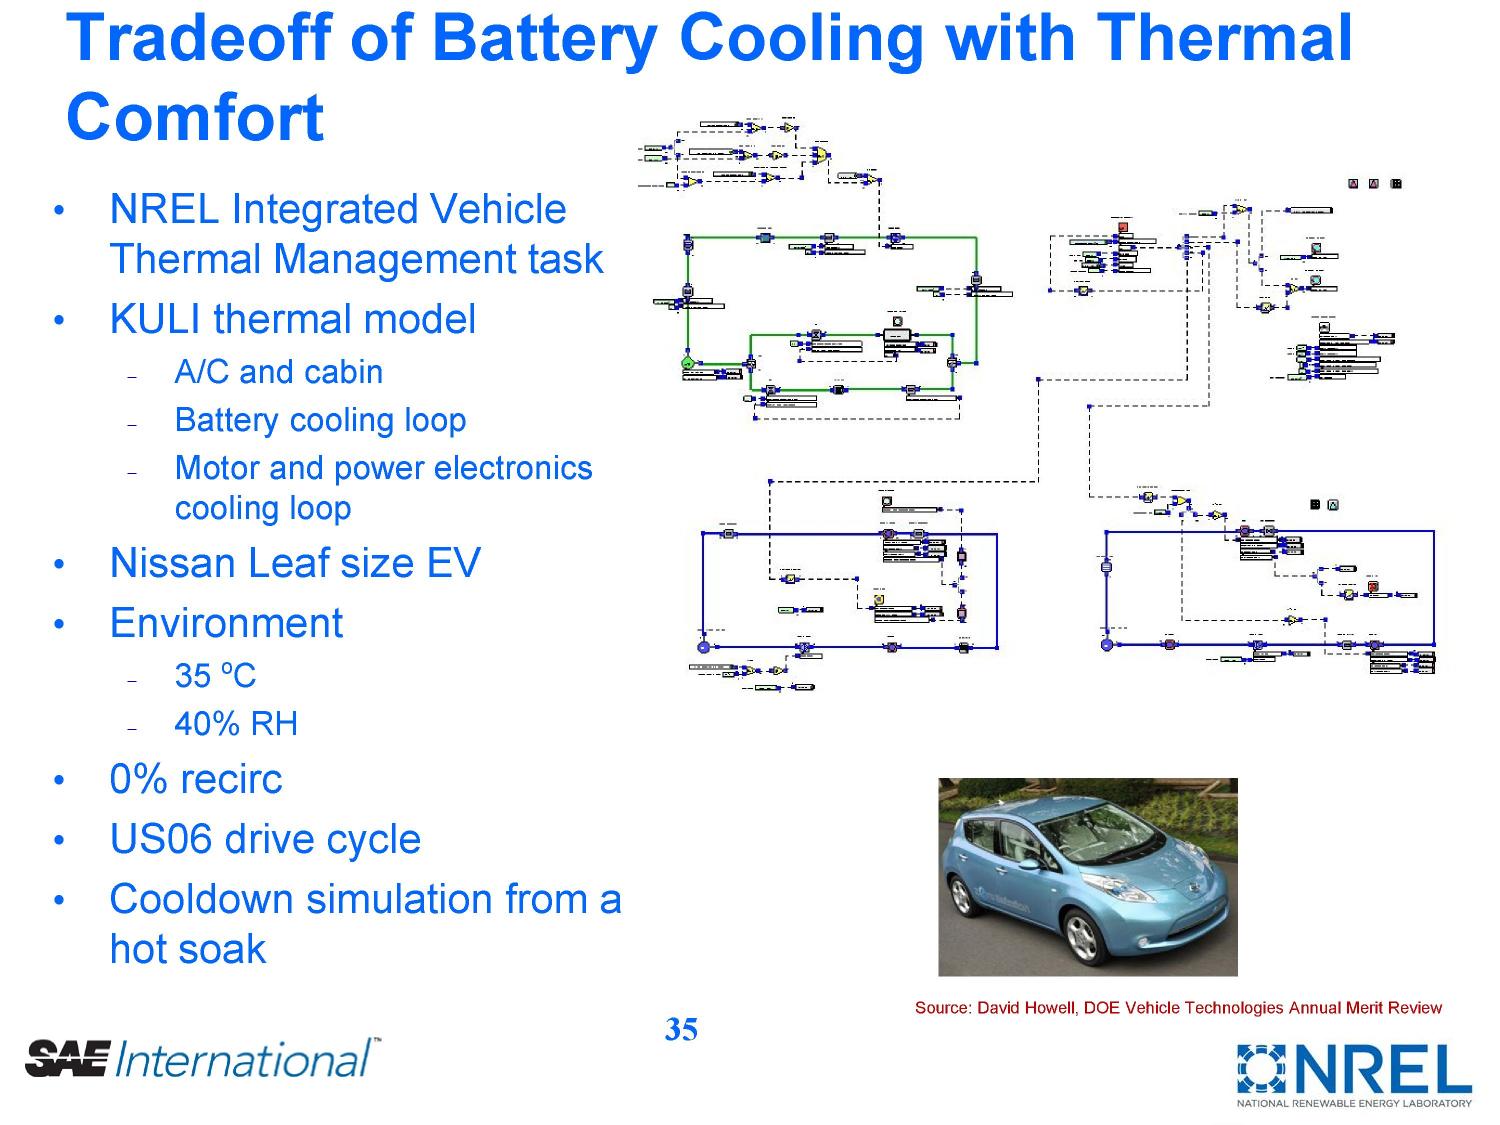 Electric Vehicle Battery Thermal Issues and Thermal Management